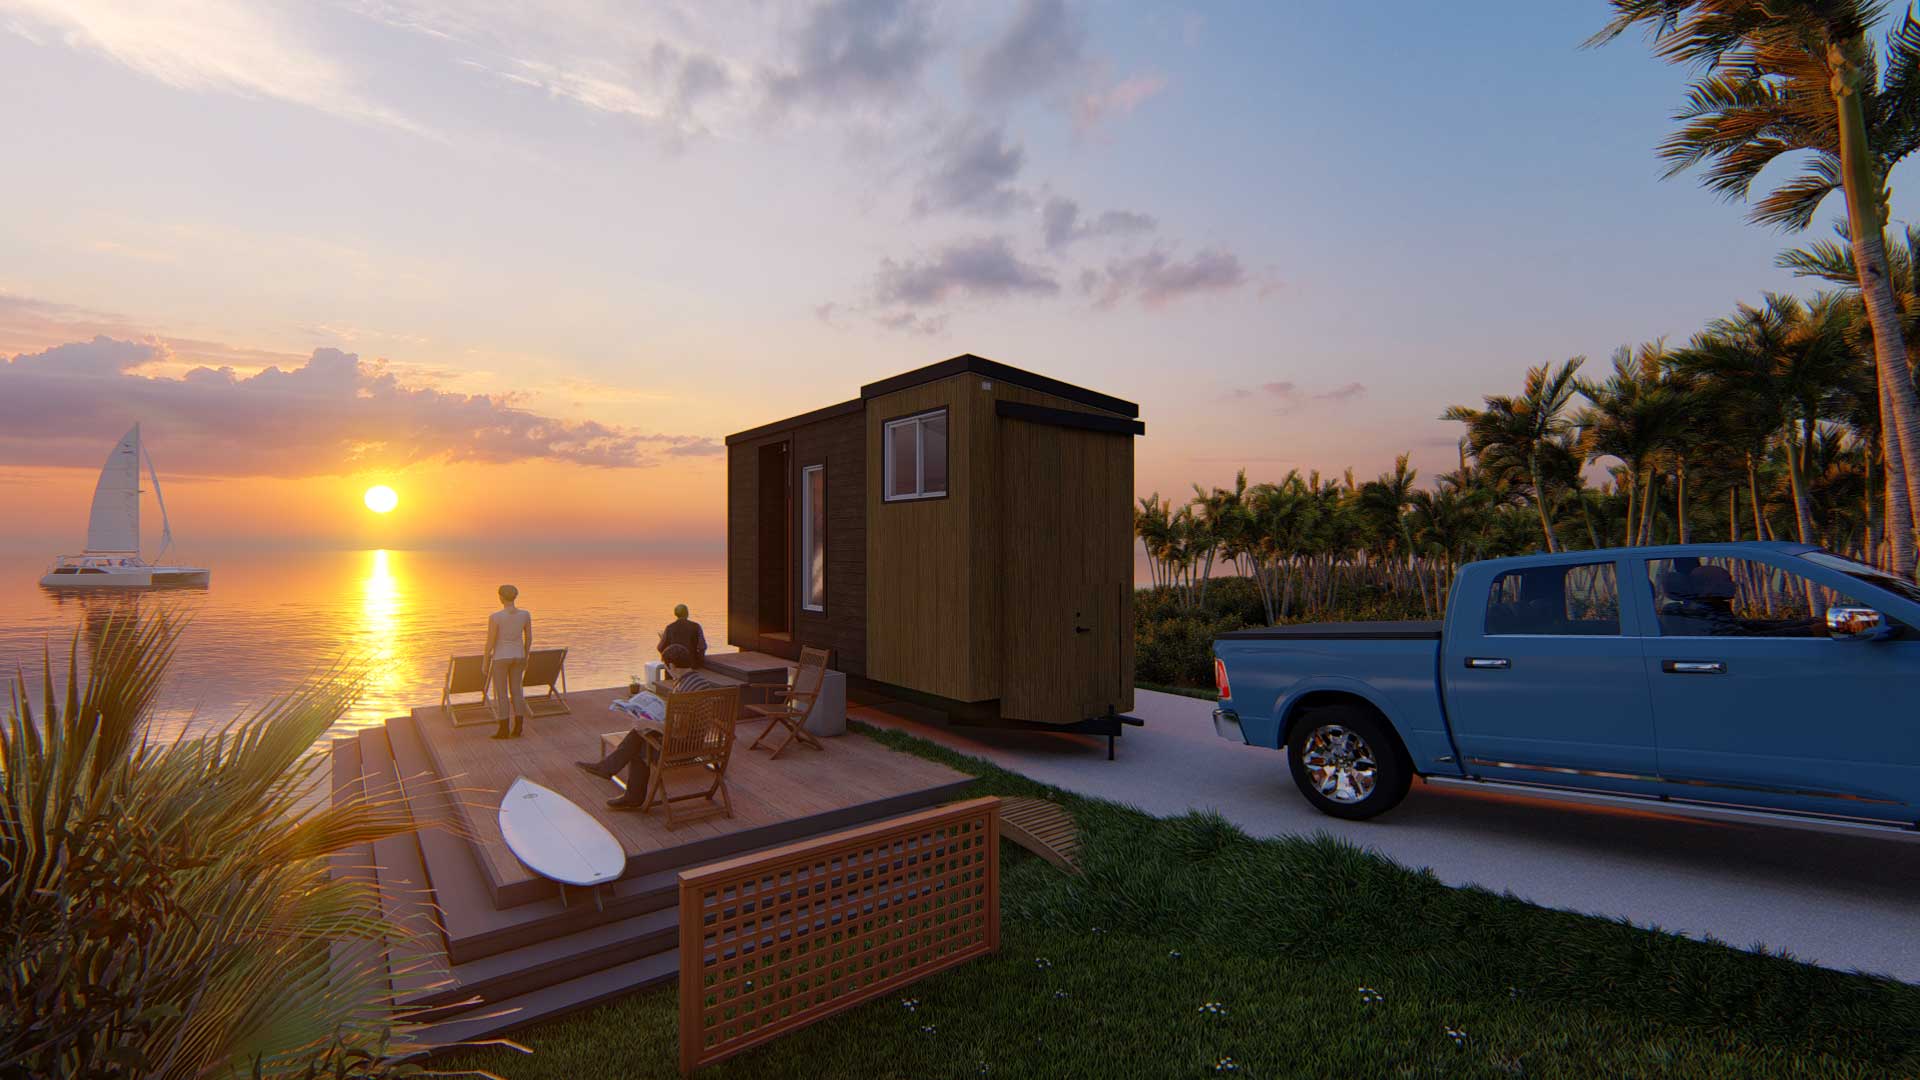 3D model of Keepsake tiny home at sunset overlooking water, showing the modern style